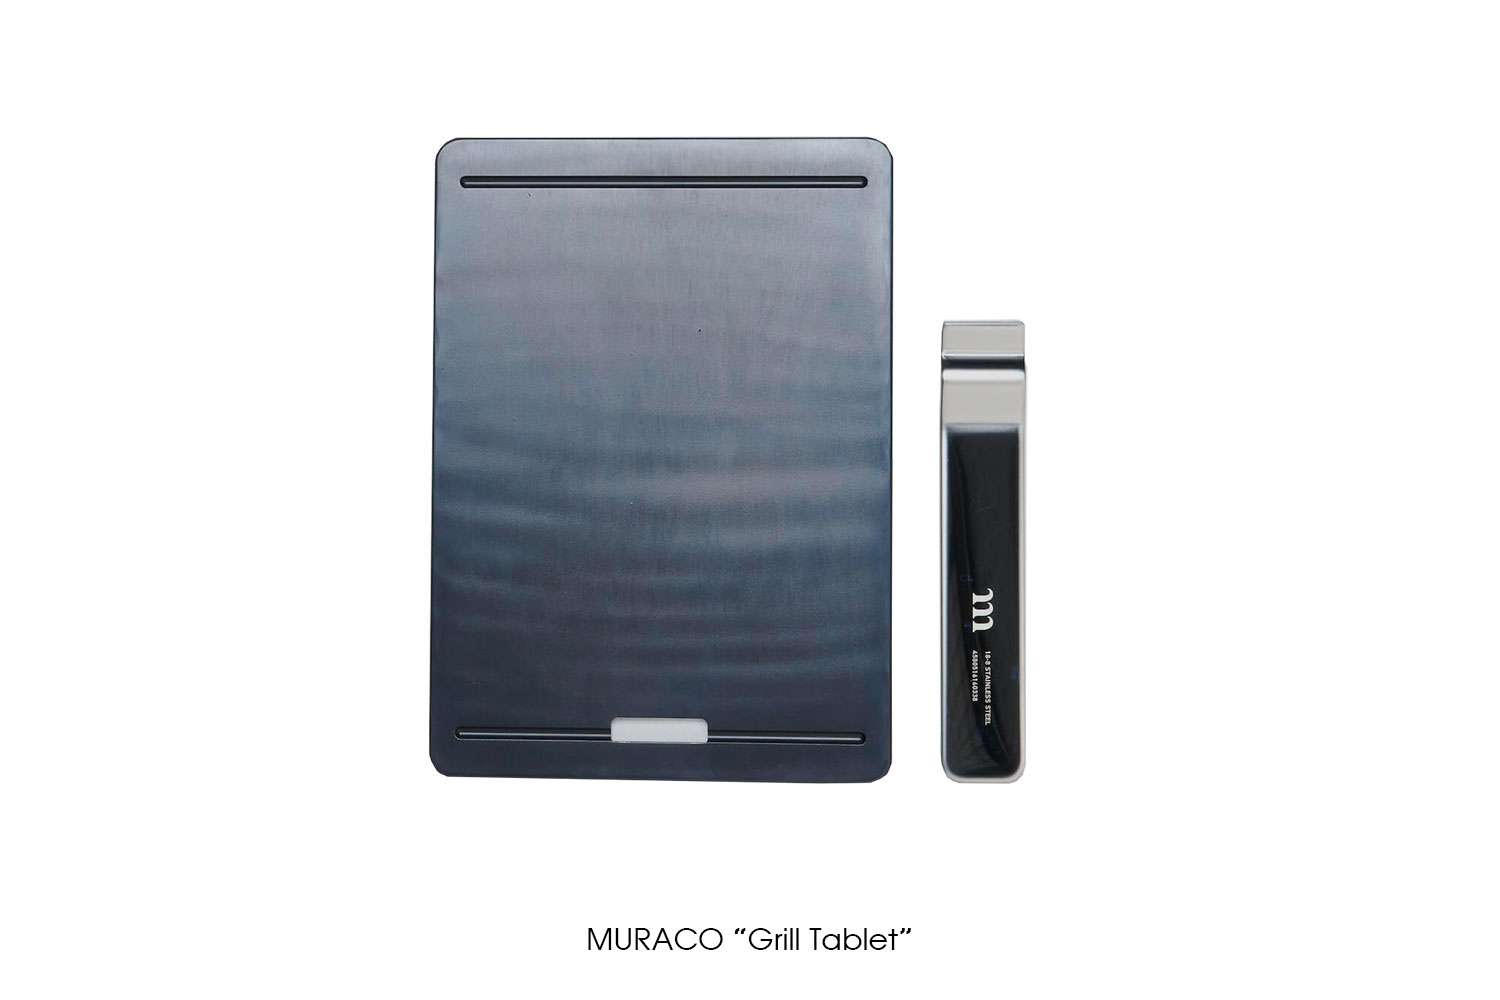 MURACO "Grill Tablet"